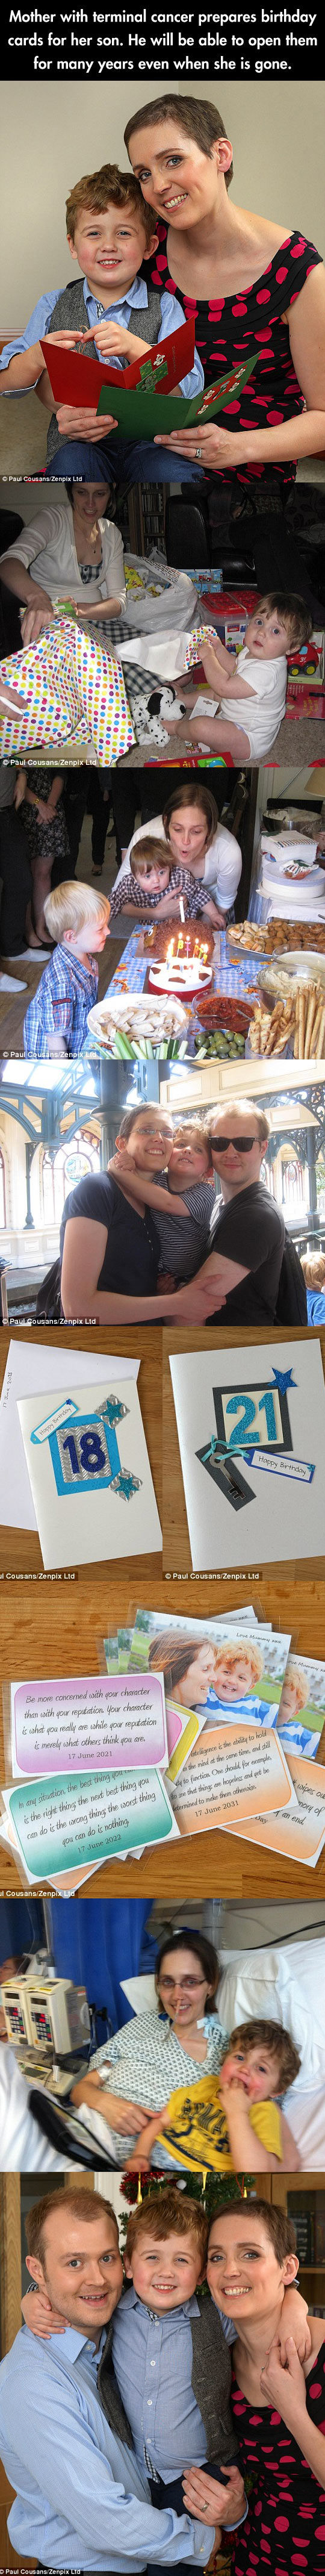 Mother with terminal cancer prepares birthday cards for son.